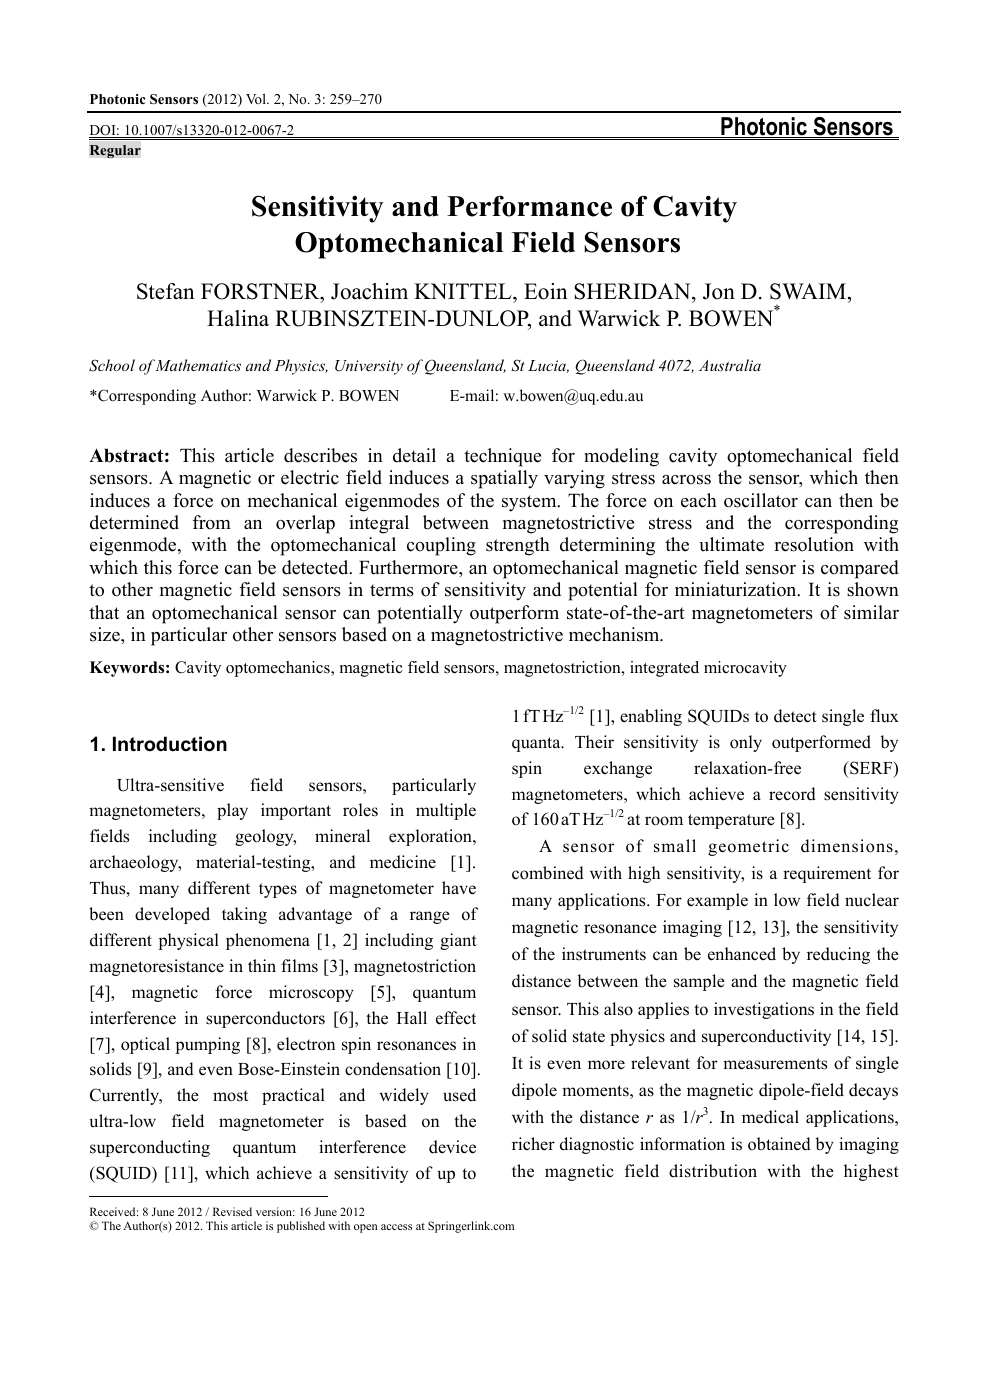 Sensitivity And Performance Of Cavity Optomechanical Field Sensors Topic Of Research Paper In Nano Technology Download Scholarly Article Pdf And Read For Free On Cyberleninka Open Science Hub